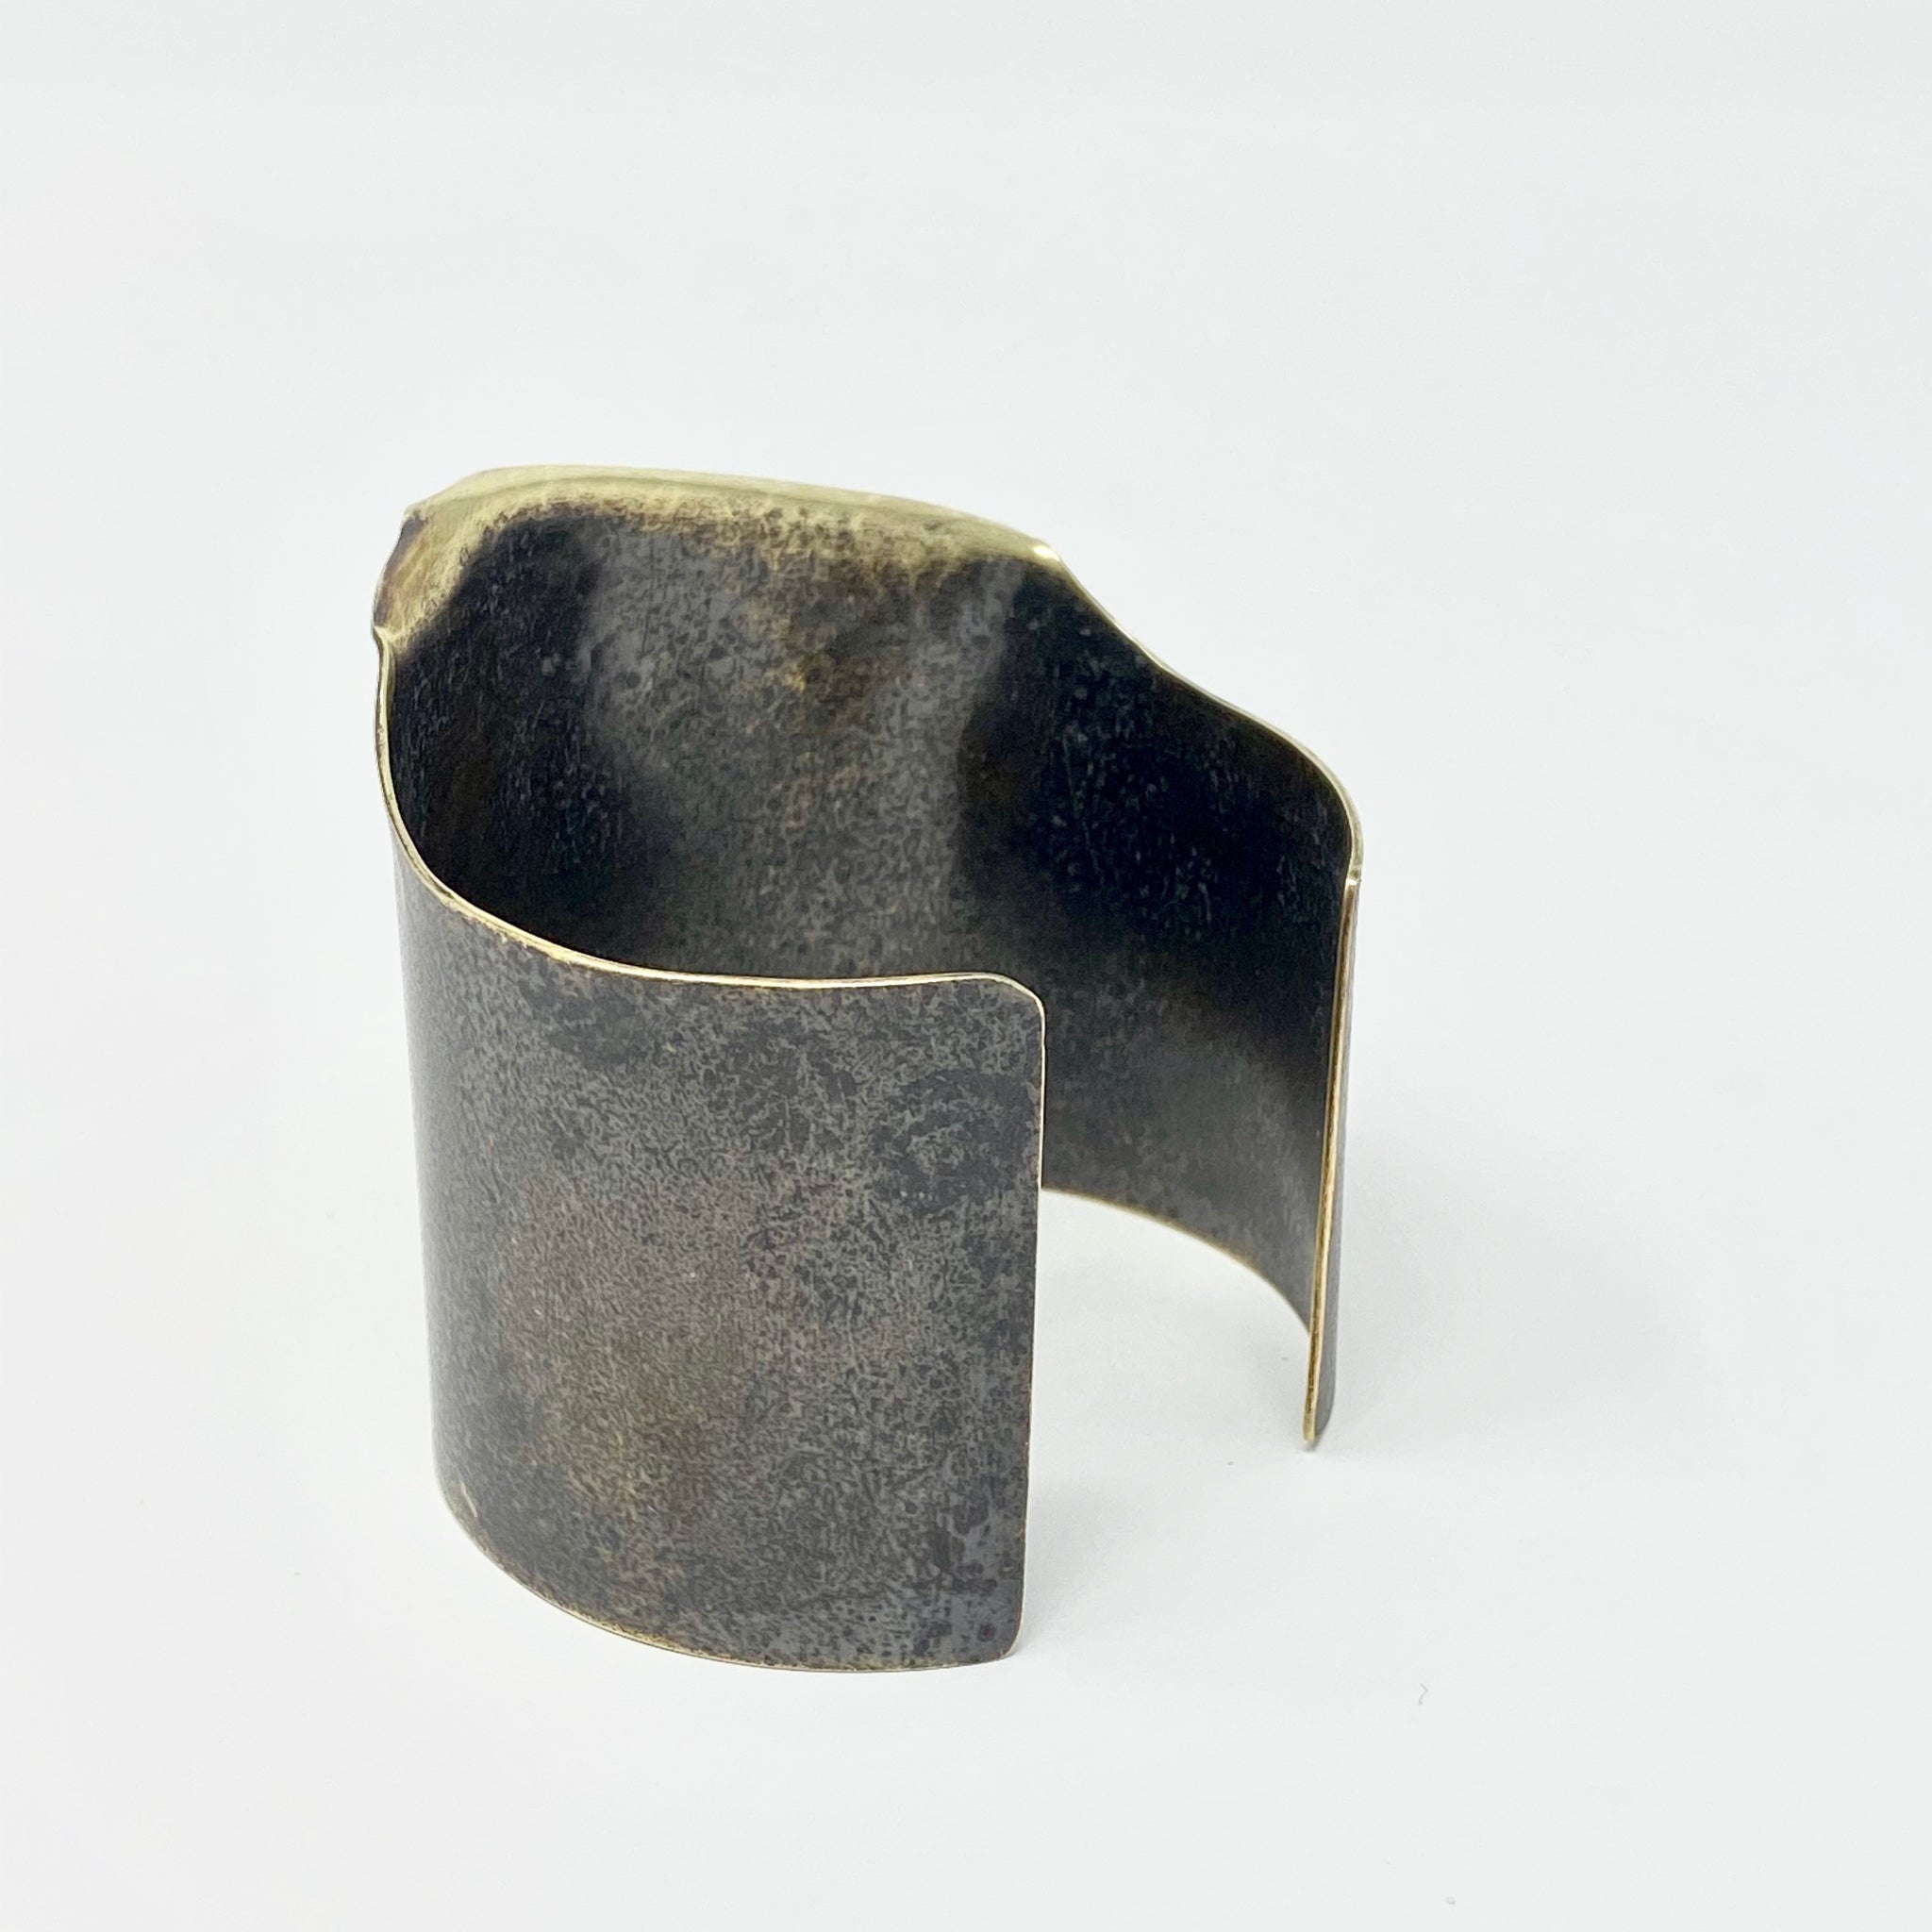 Wither cuff bracelet